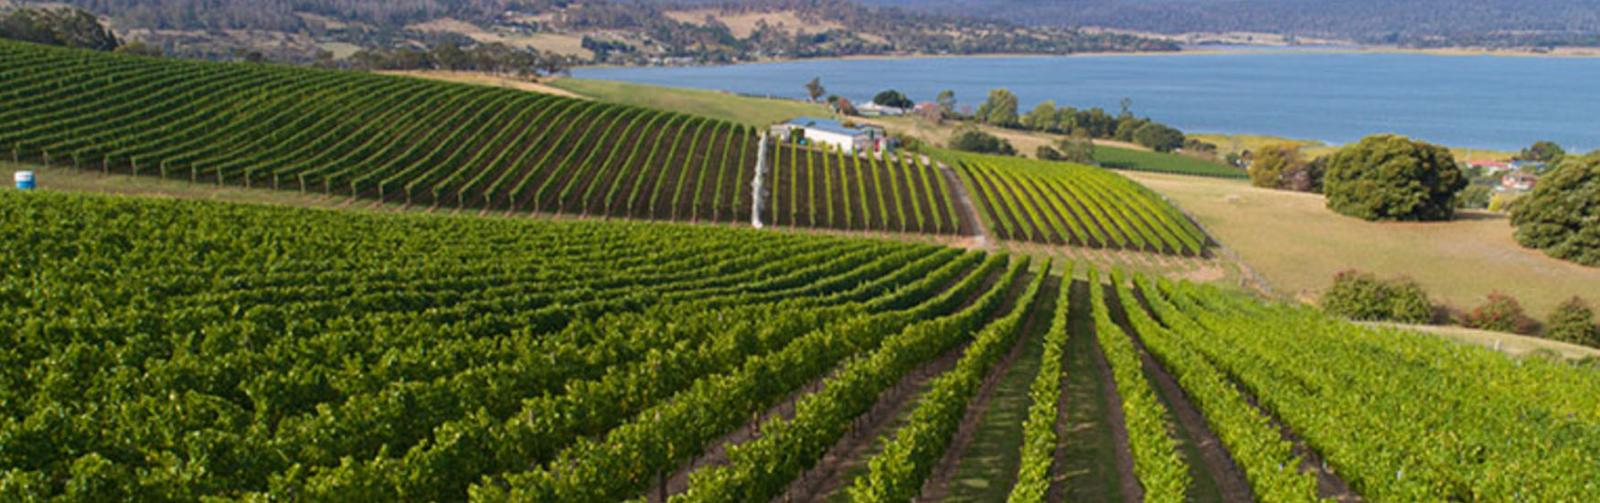 The complete guide to visiting the Cradle Coast and North West wine region of Tasmania